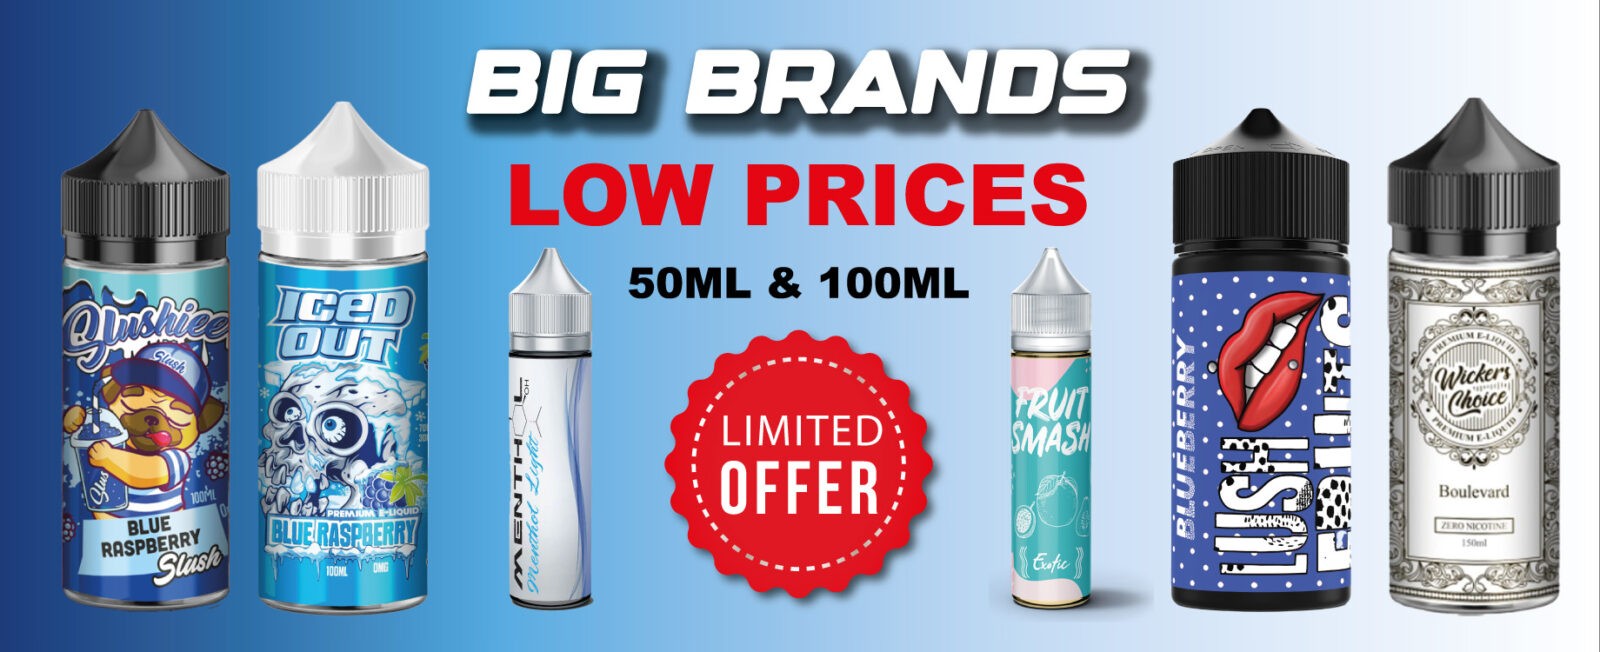 banner-big-brands-low-prices